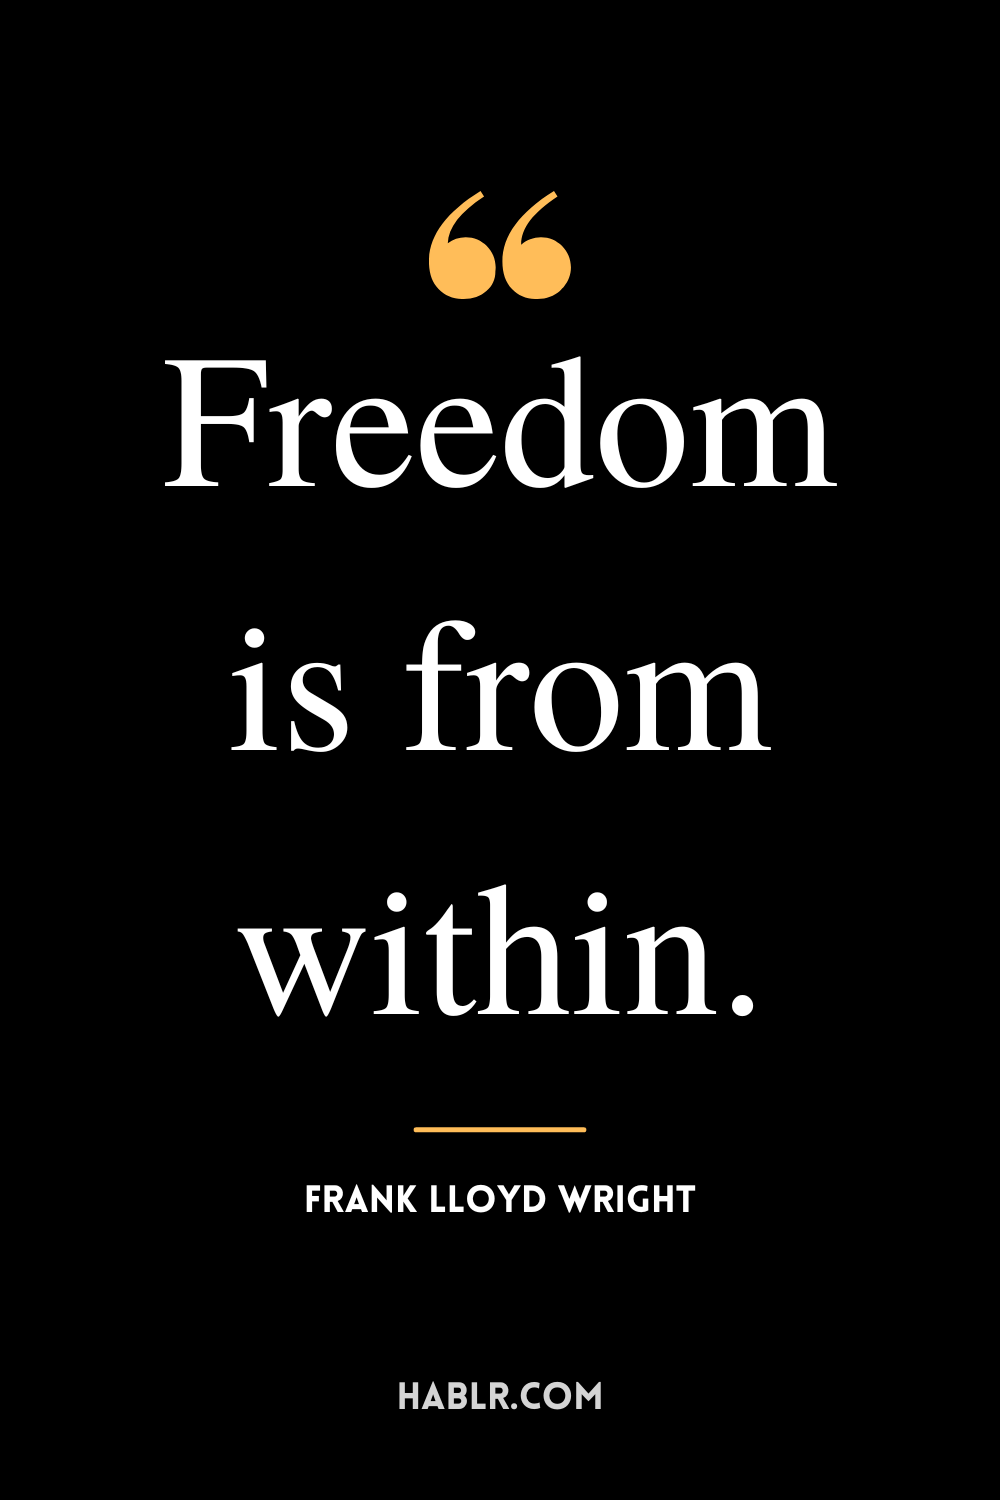 "Freedom is from within." -Frank Lloyd Wright